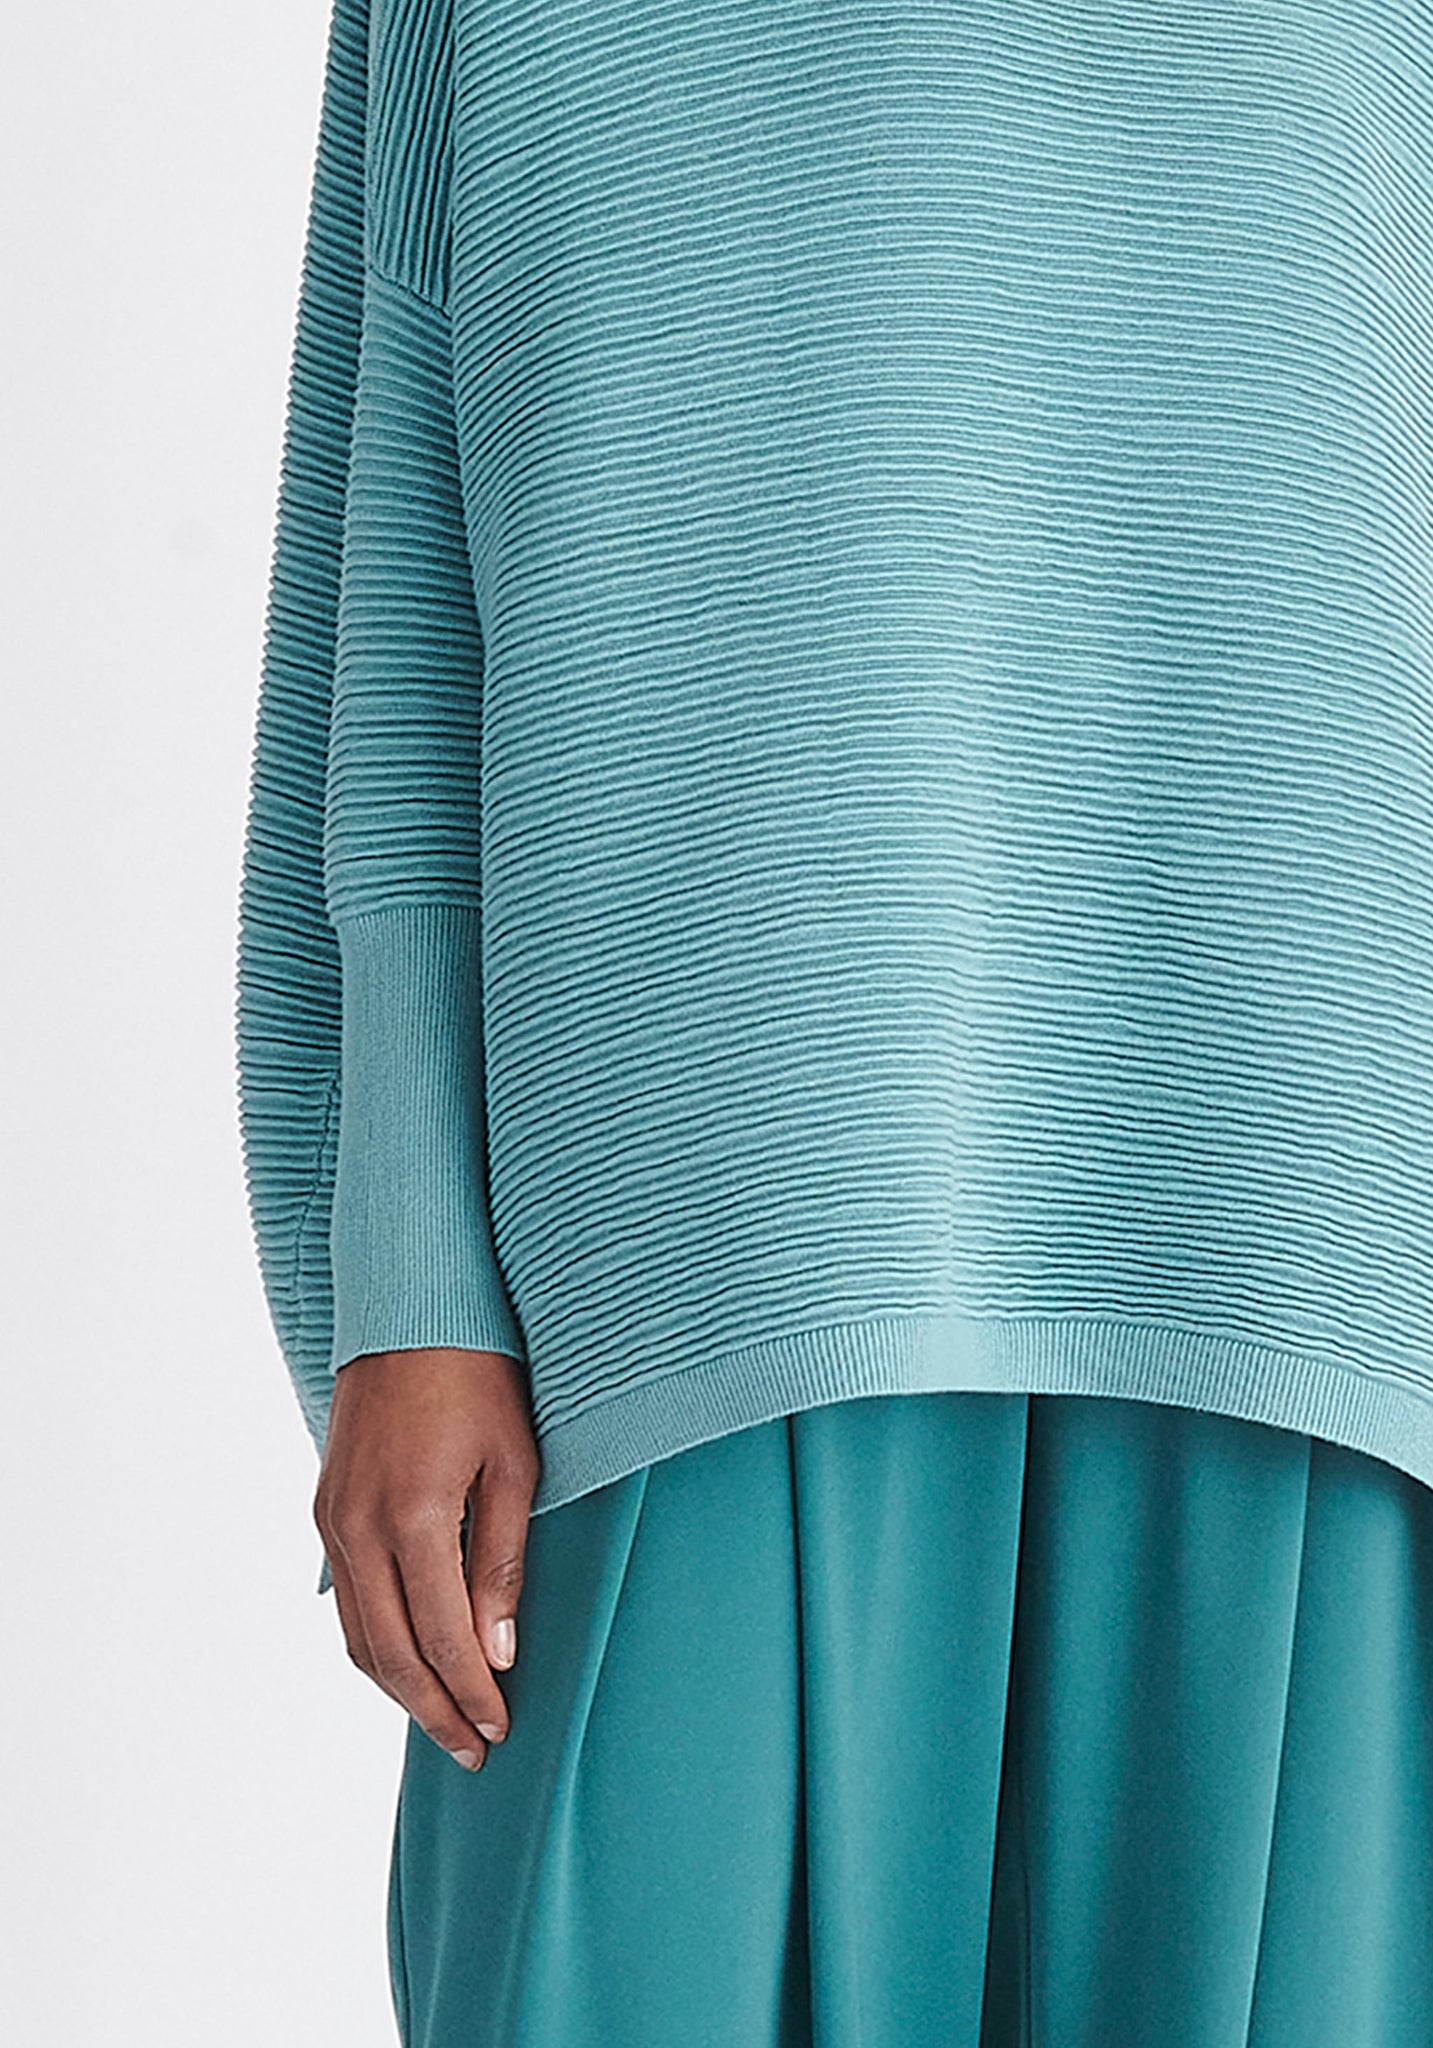 Paisie Ribbed Oversized Knit Jumper in Teal | Knitwear | Paisie